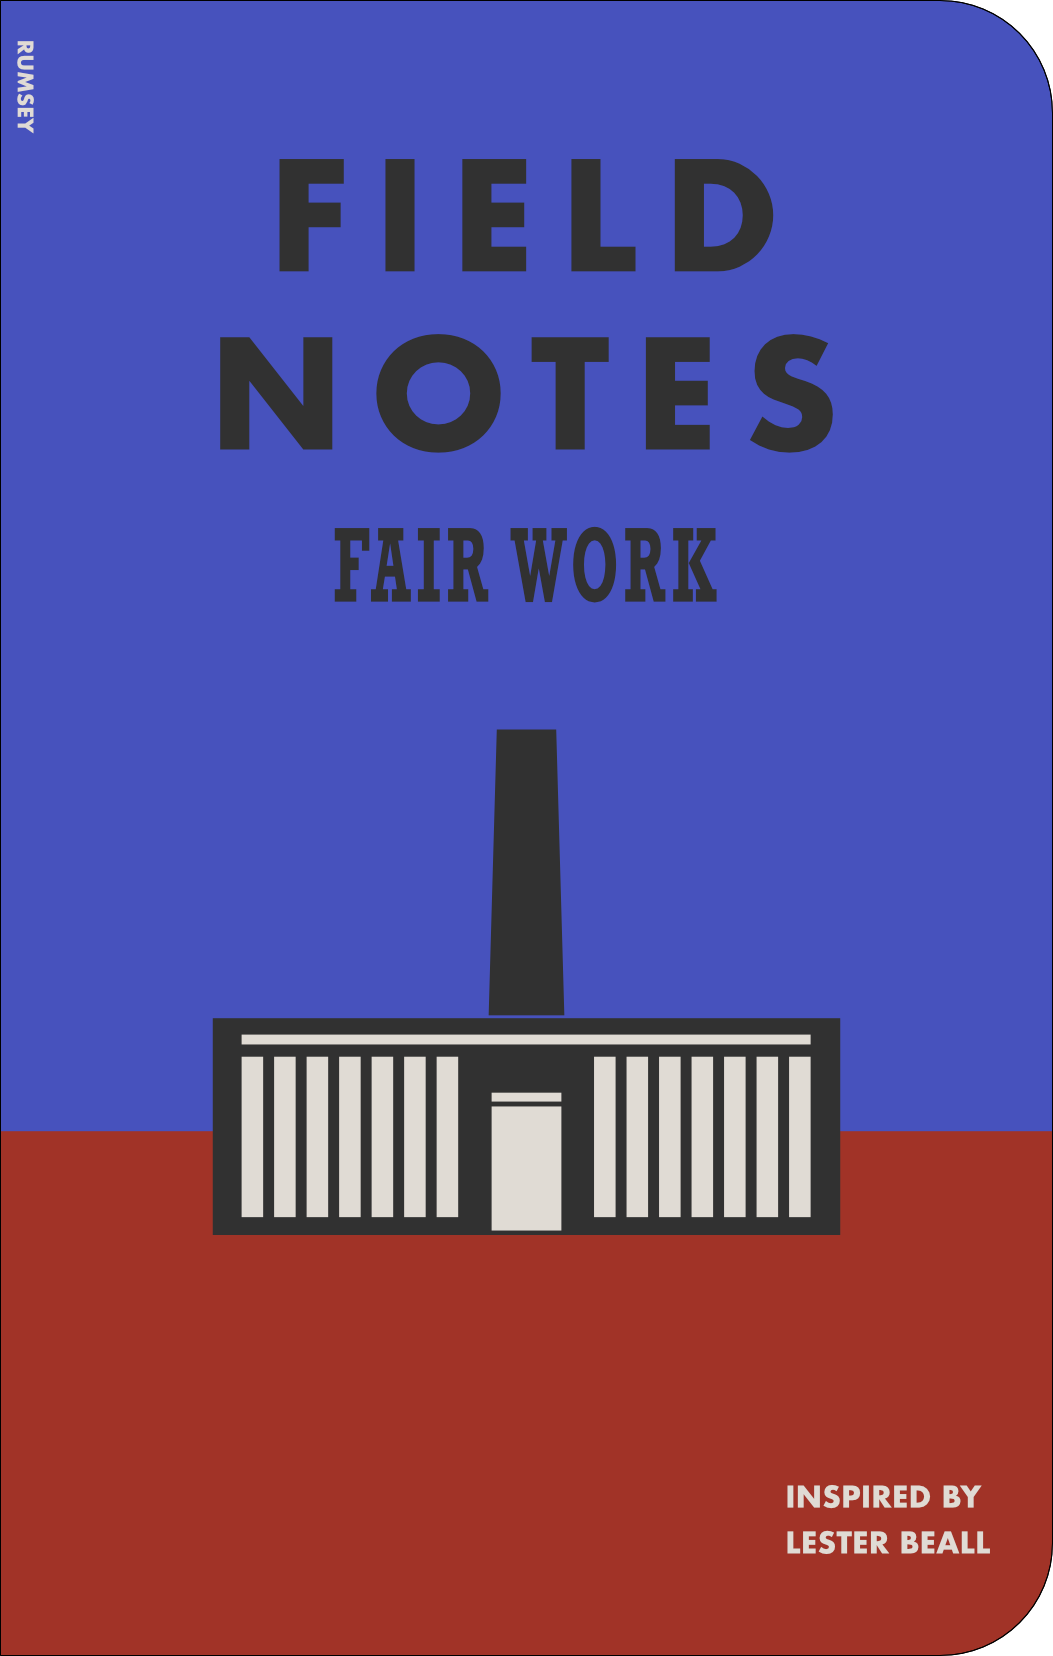 Field Notes designs based on the work of Lester Bell